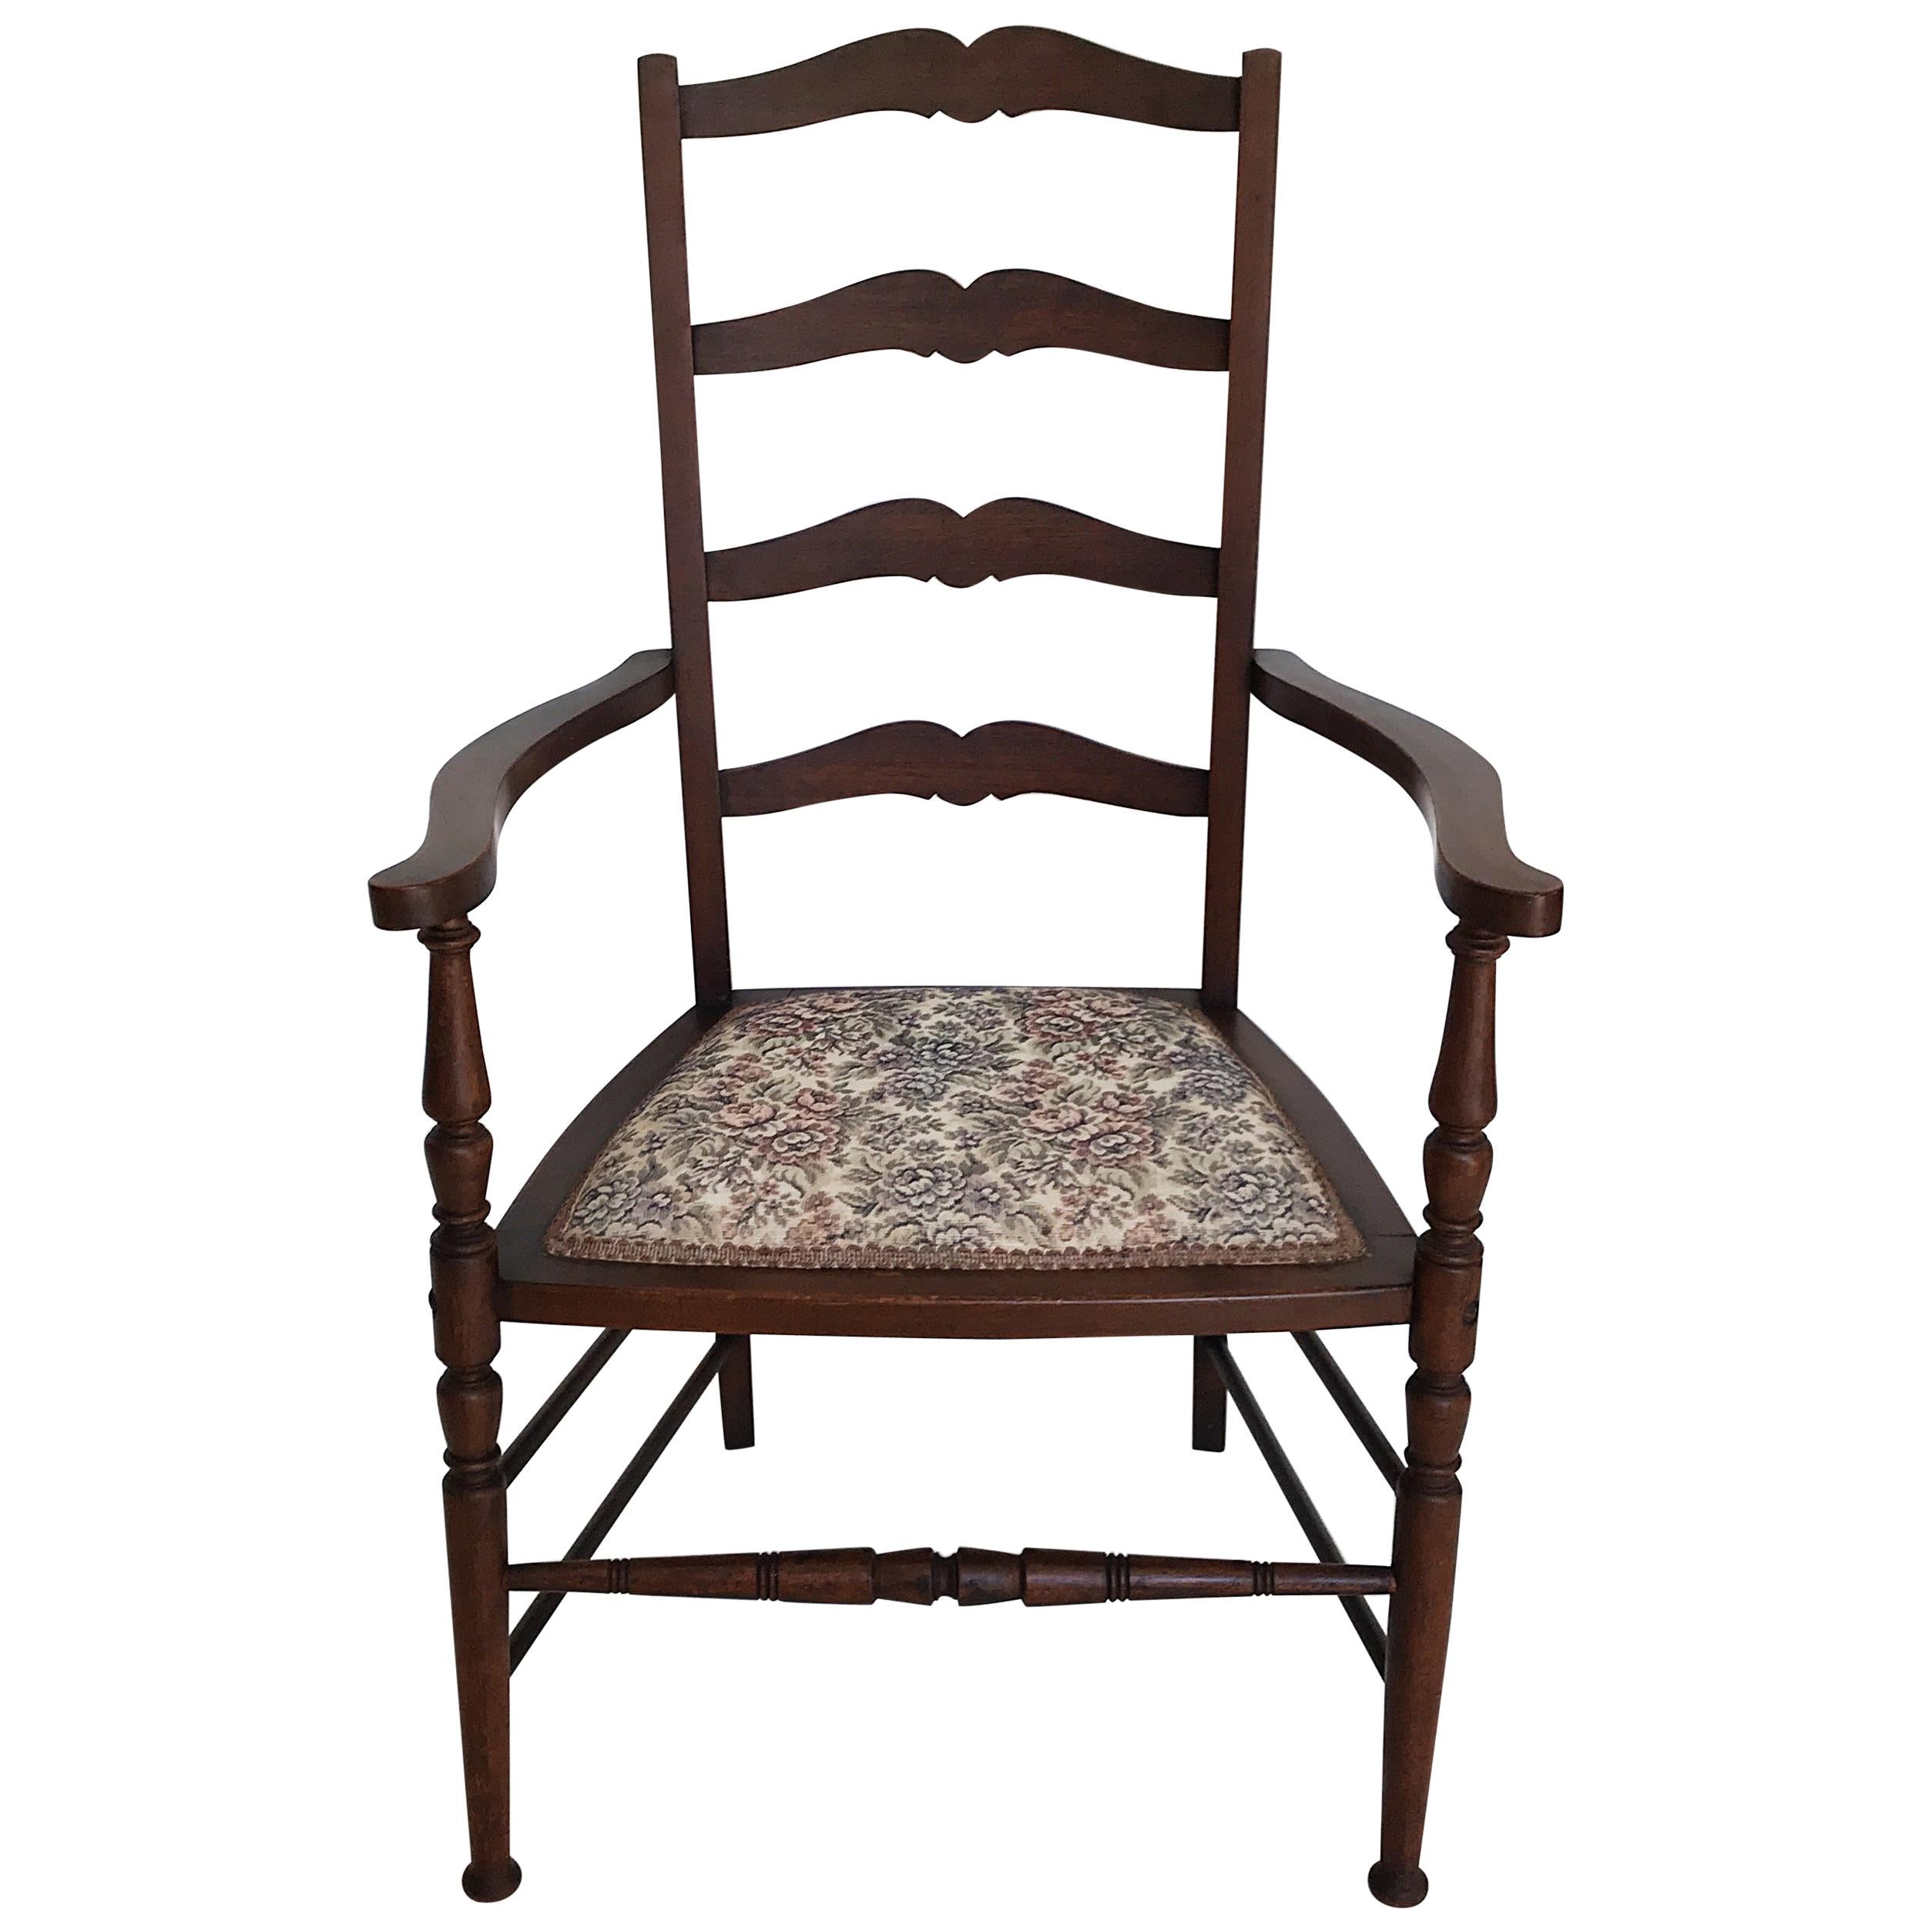 Early-20th Century Ladder Back Chair by Beard Watson Limited, Sydney, Australia For Sale